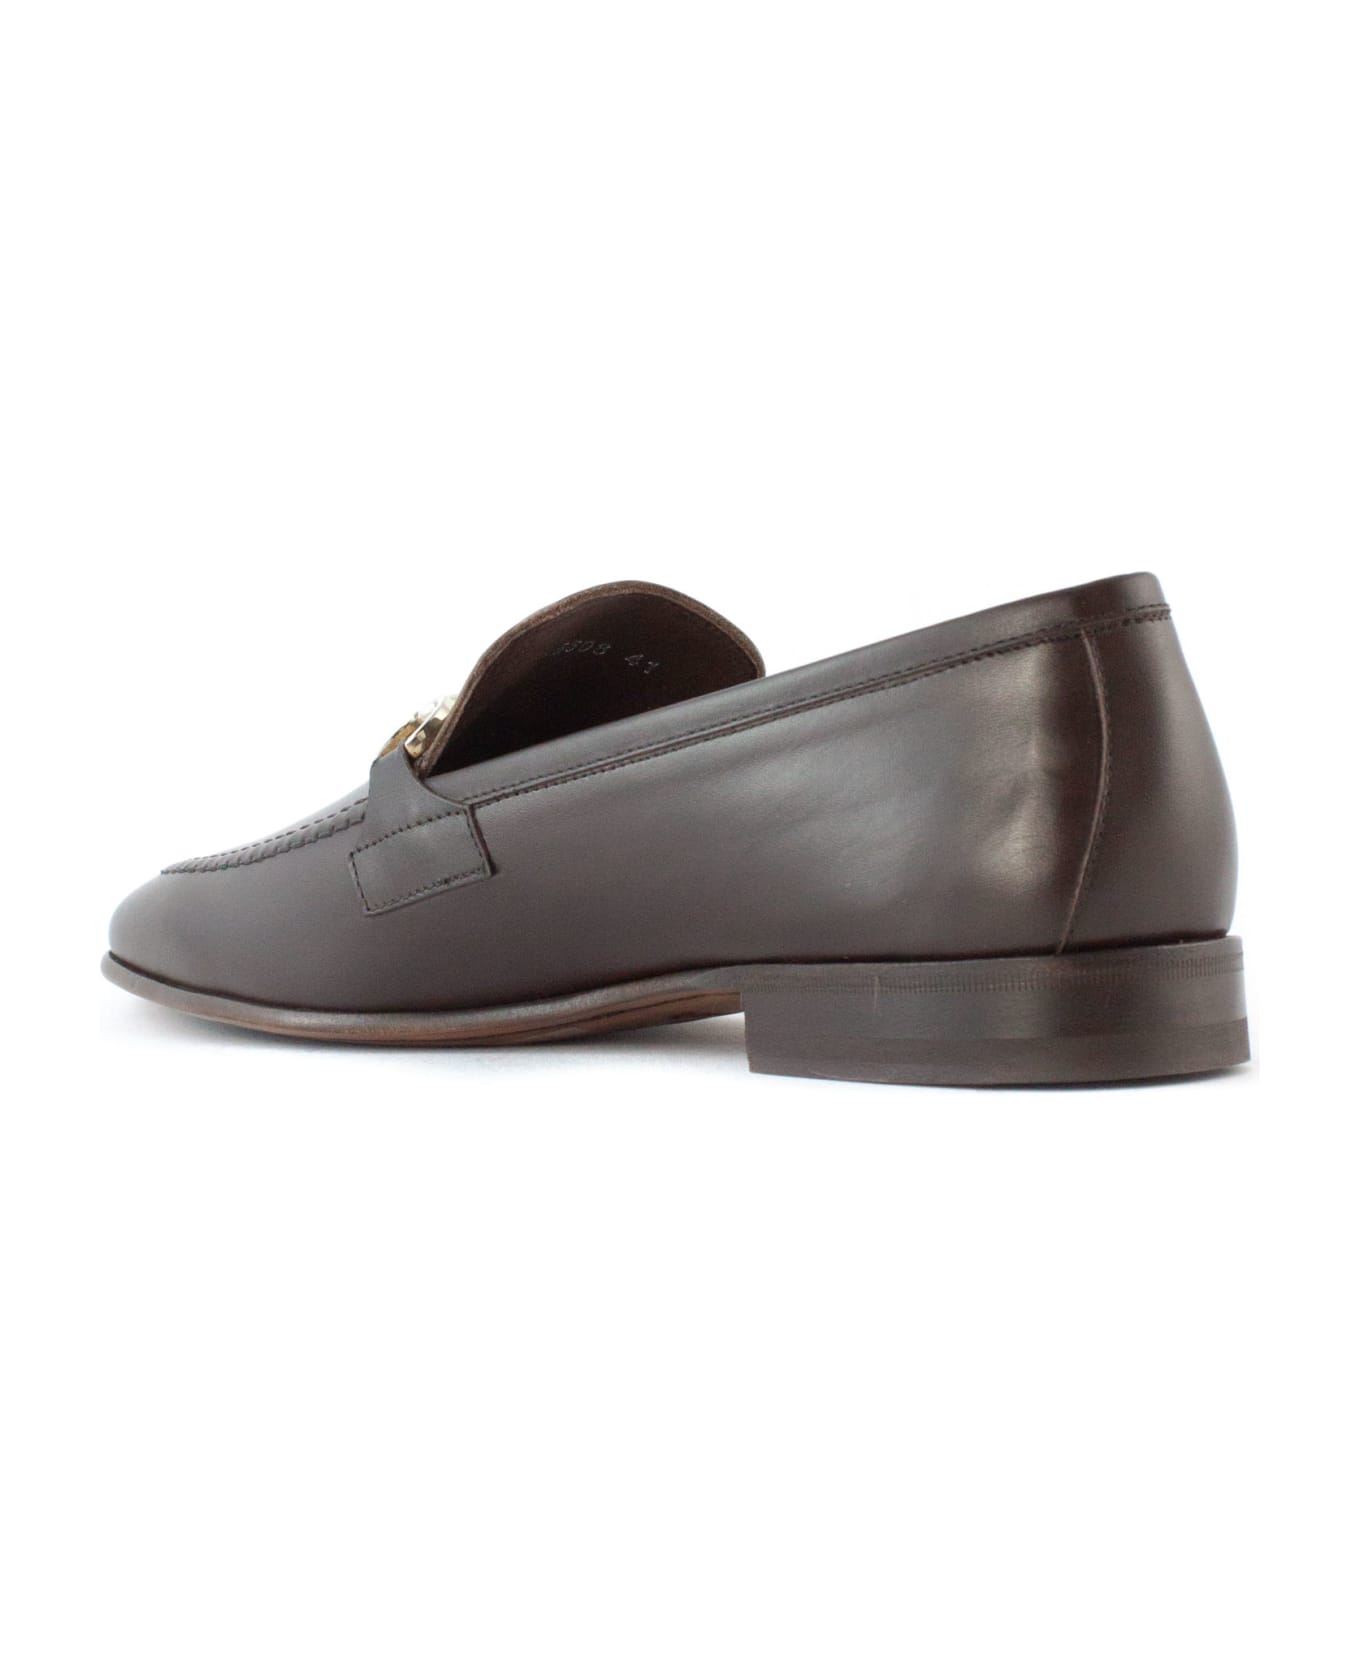 Berwick 1707 Brown Leather Loafer - Brown